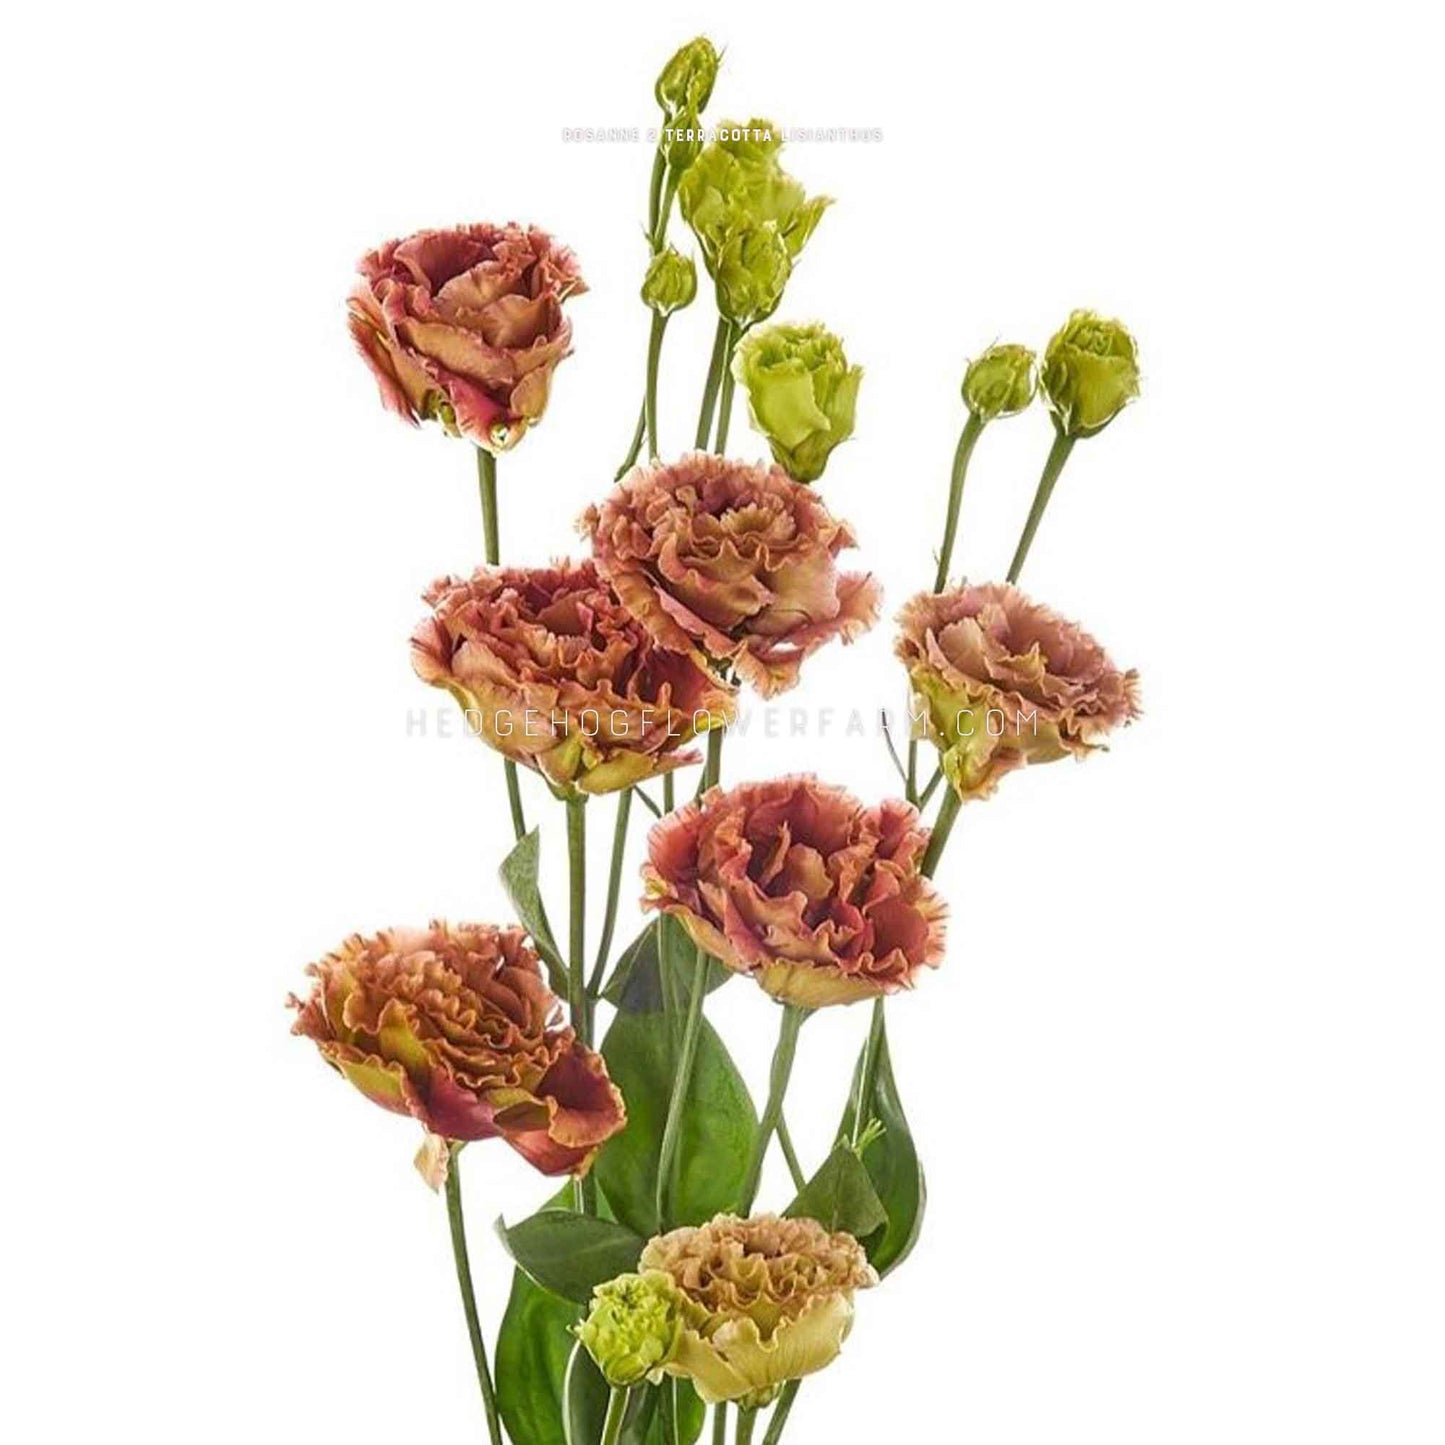 A couple of Rosanne 2 Terracotta Lisianthus flowers. Light brown and green ruffled petals.